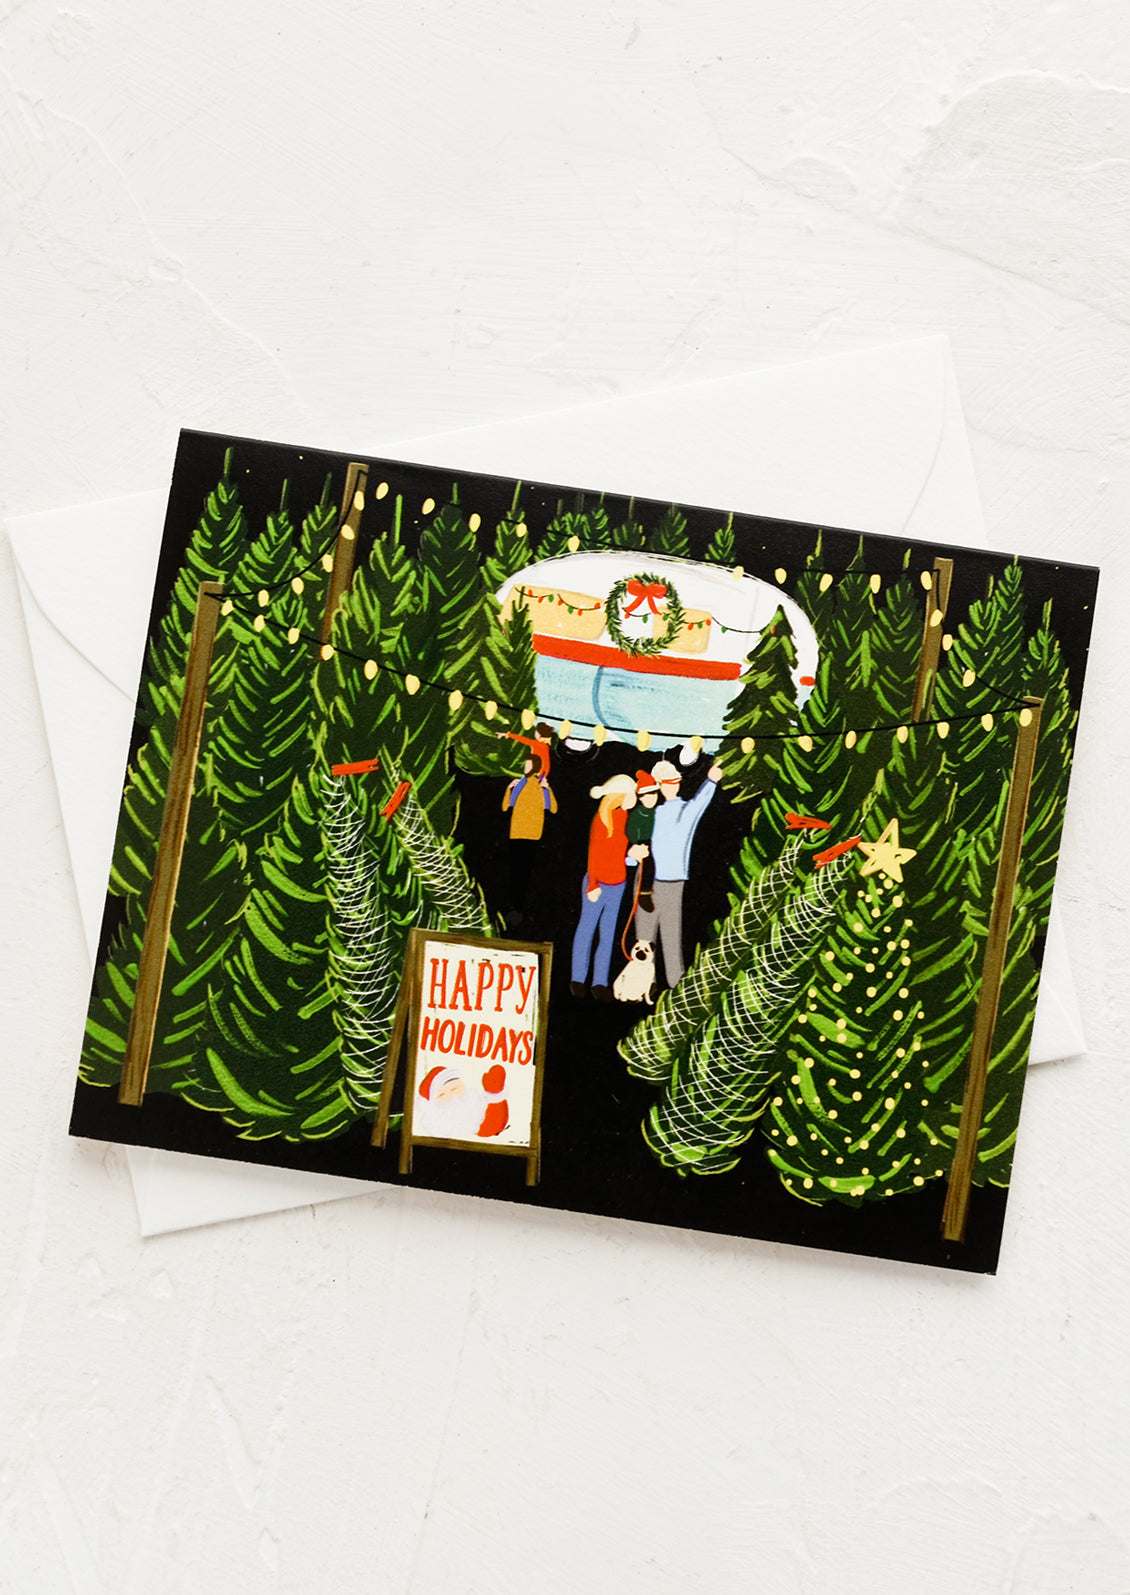 A greeting card with illustration of family shopping for a Christmas tree.